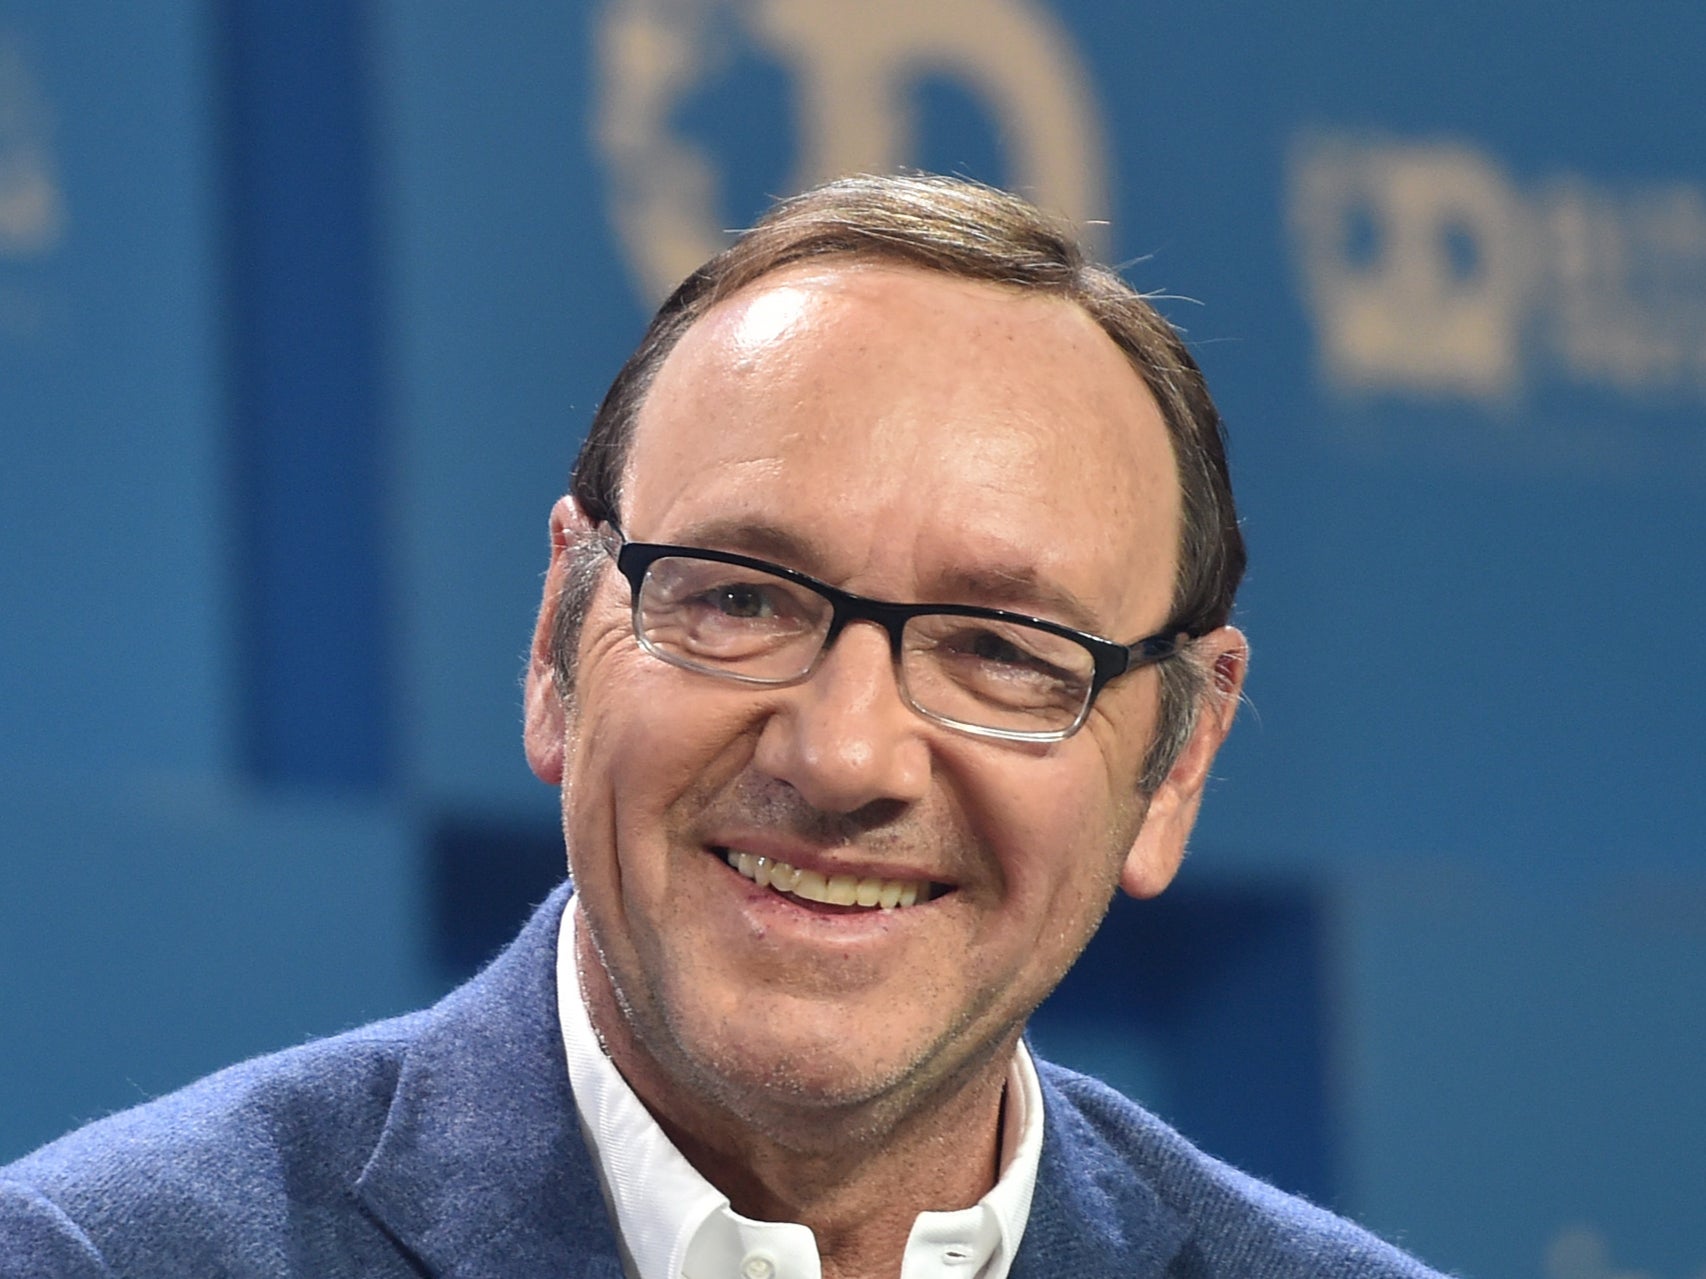 Kevin Spacey is returning in a brand new film